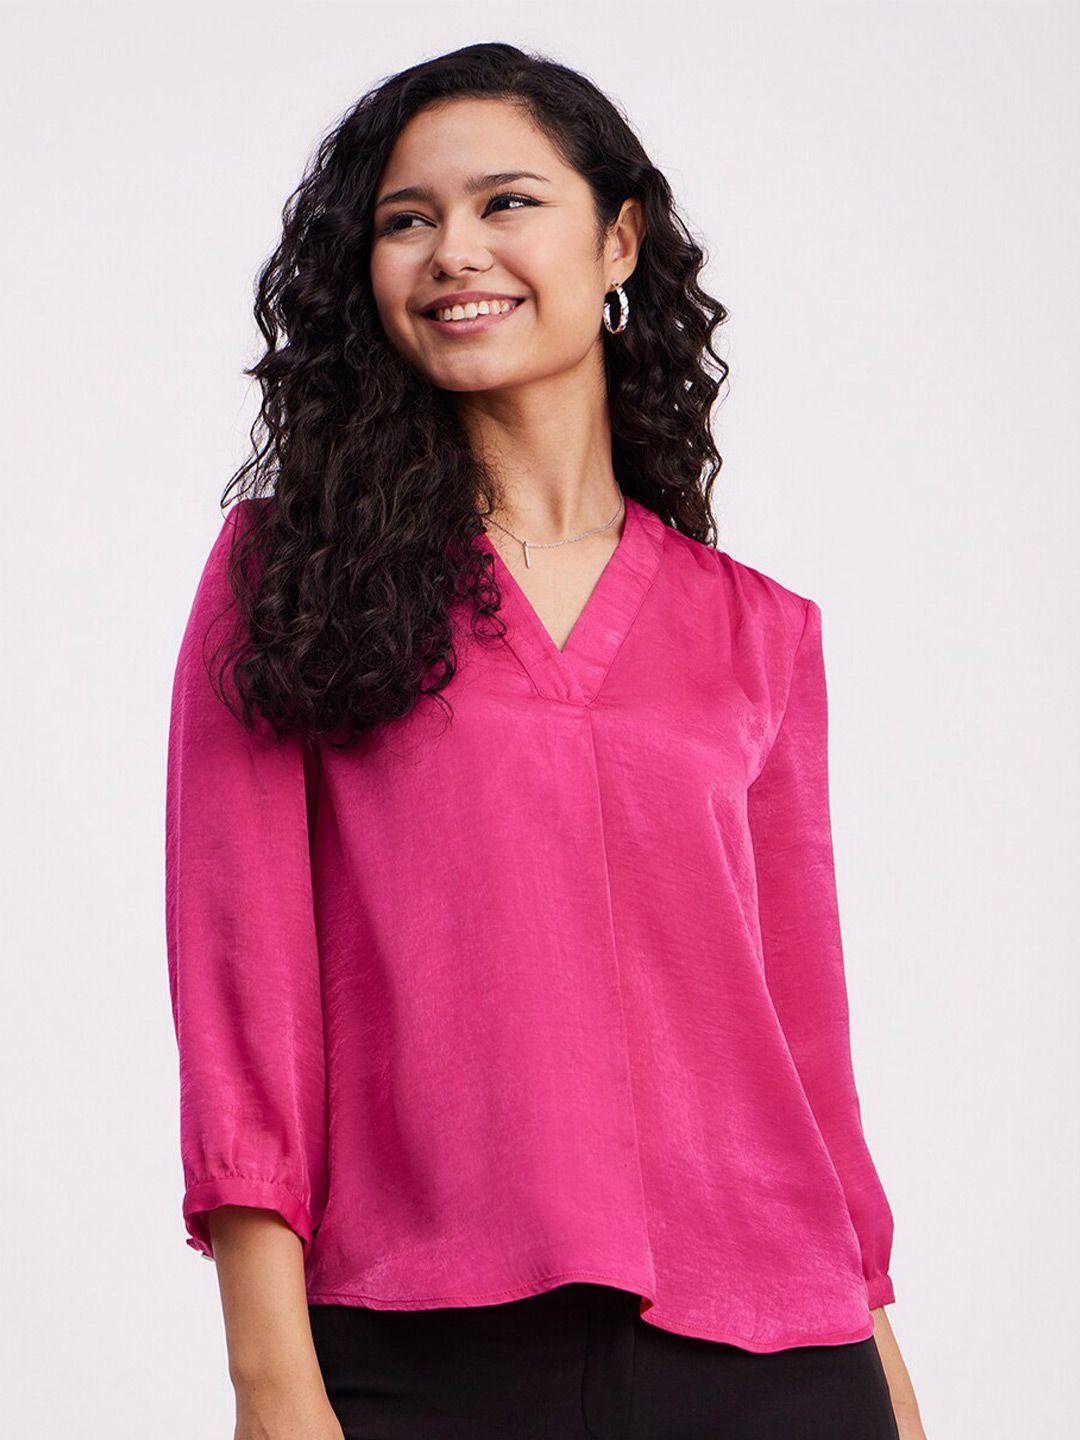 fablestreet v-neck cuffed sleeves satin top